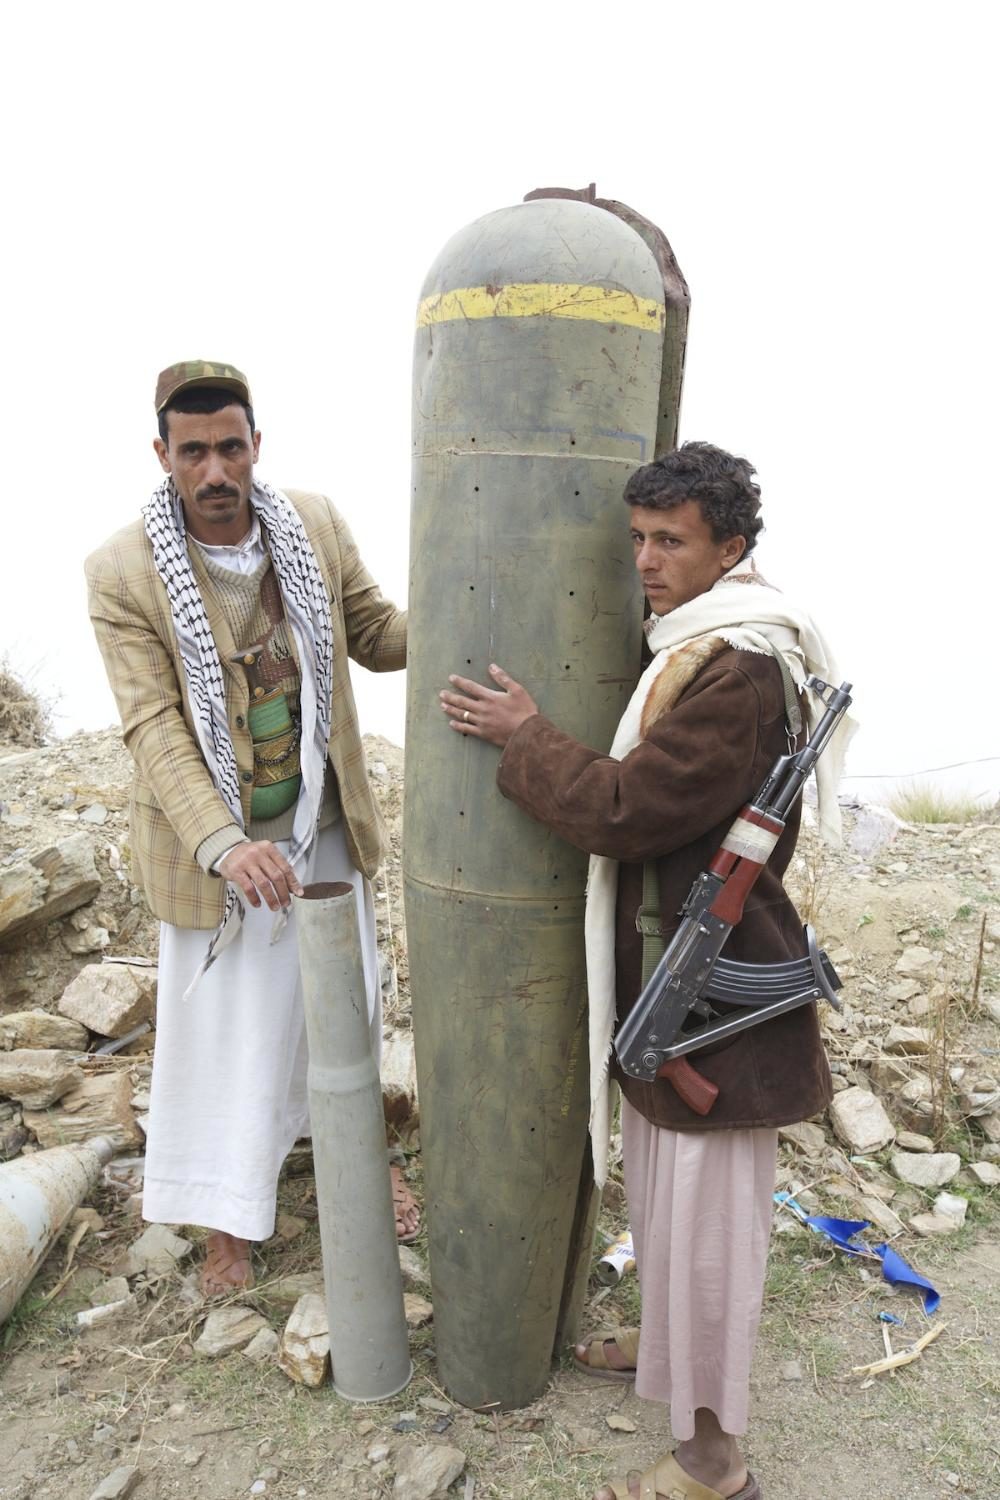 Houthi rebels pose with a US-made cluster bomb shell in northern Yemen.